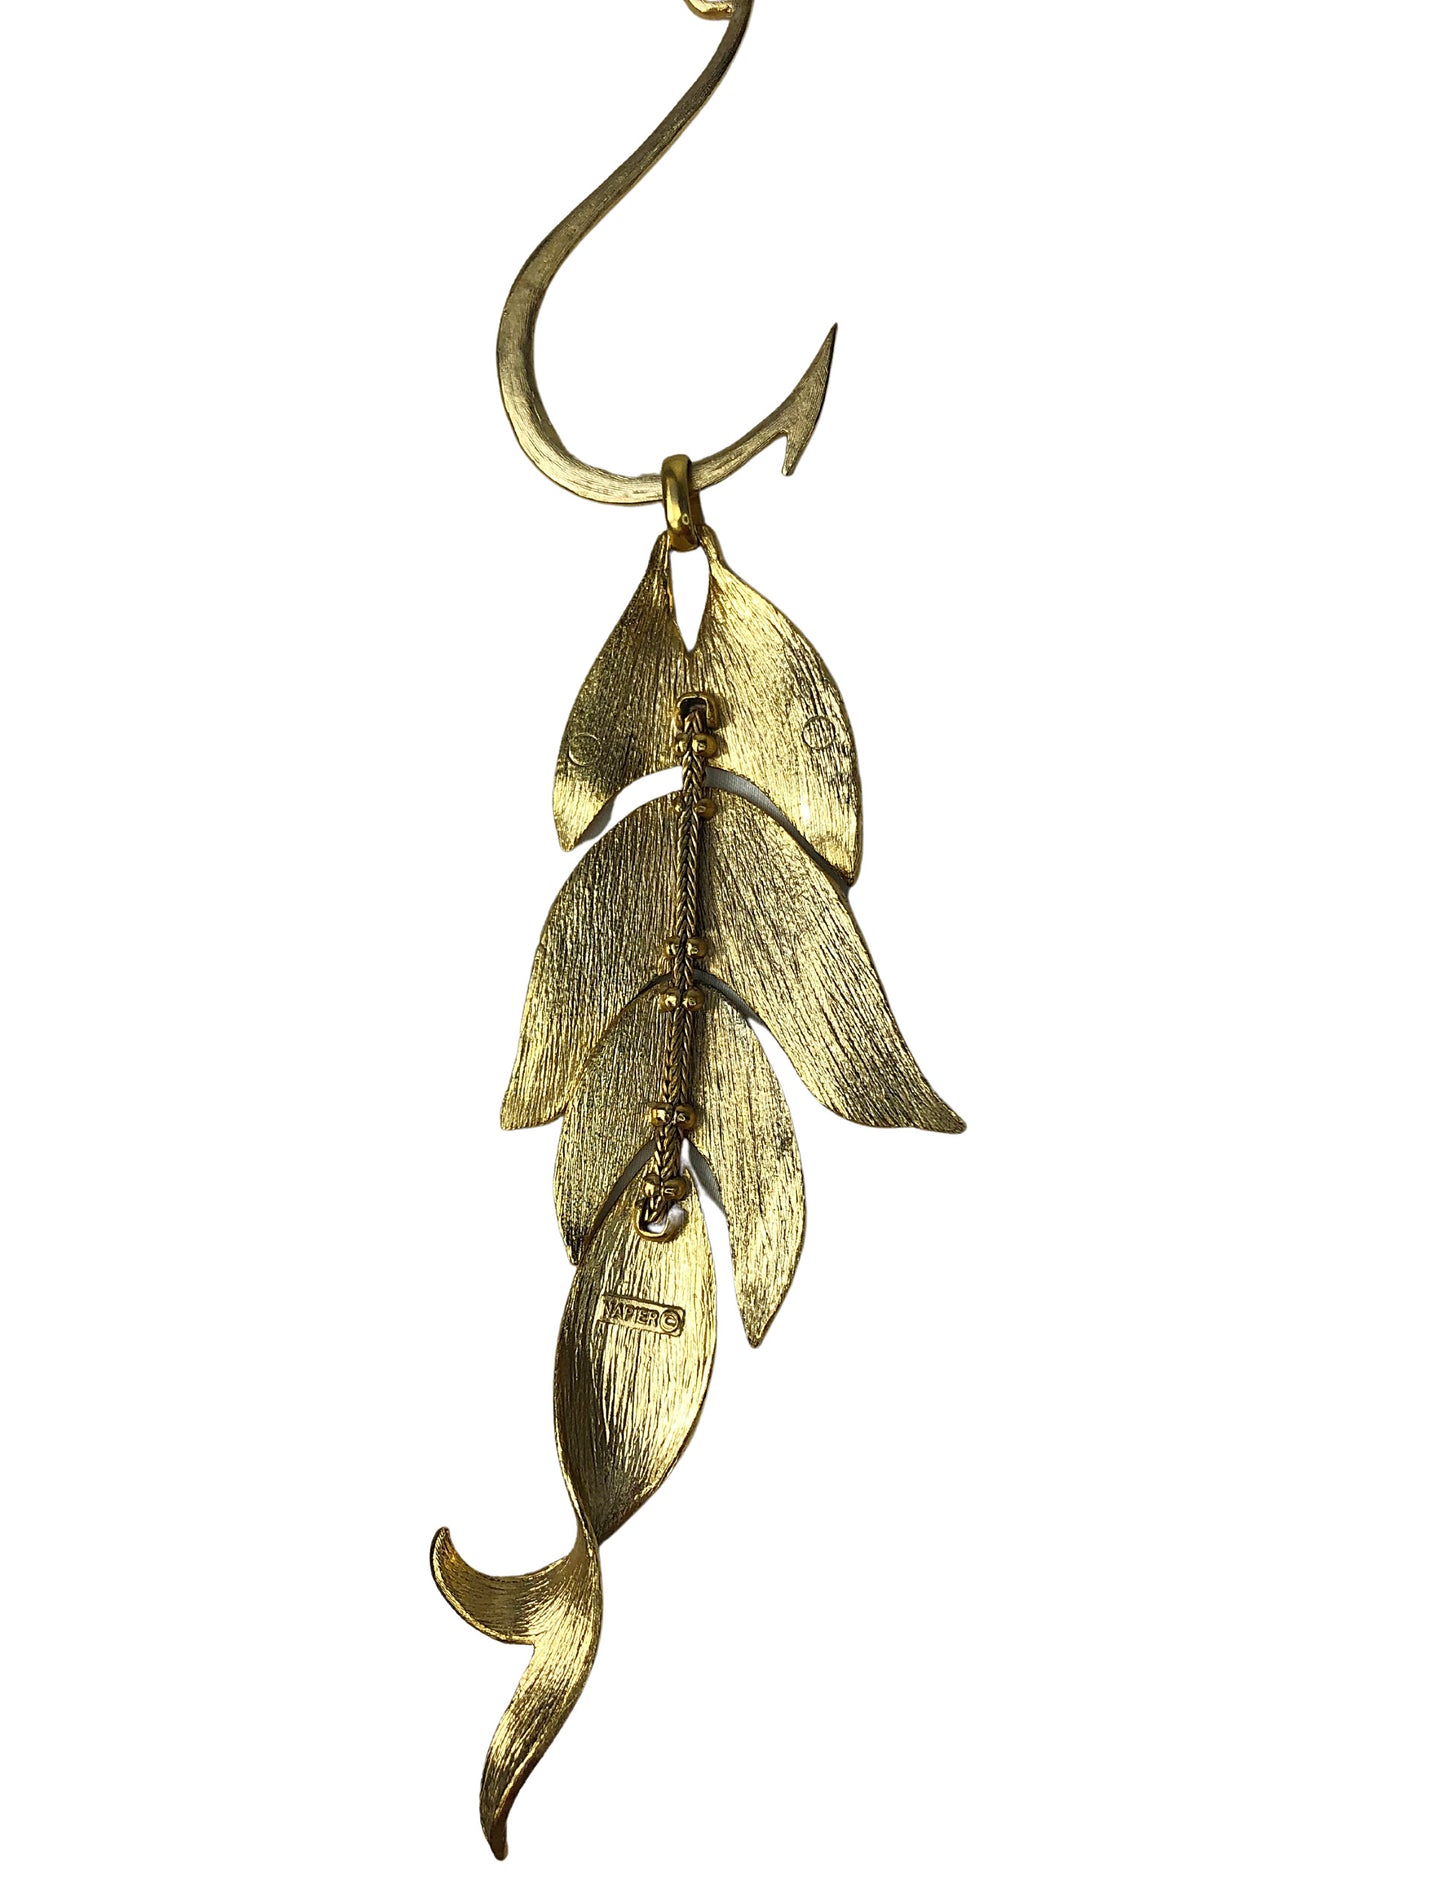 70’s Gold NAPIER Articulated Fish Pisces Pendant Chain Necklace